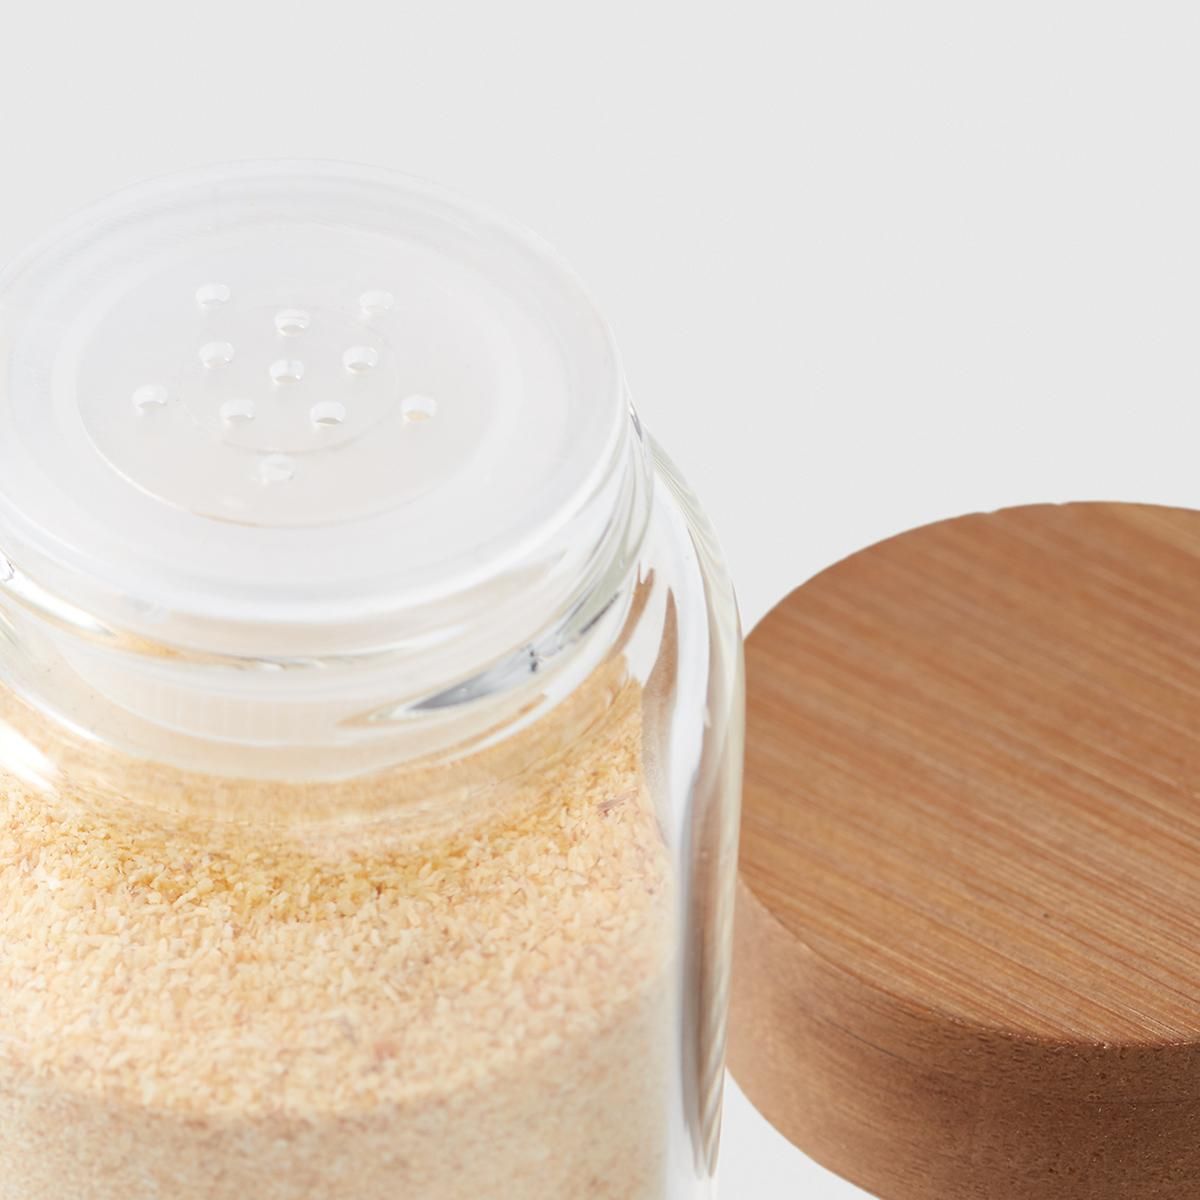 Marie Kondo Spice Jar with Bamboo Lid | The Container Store